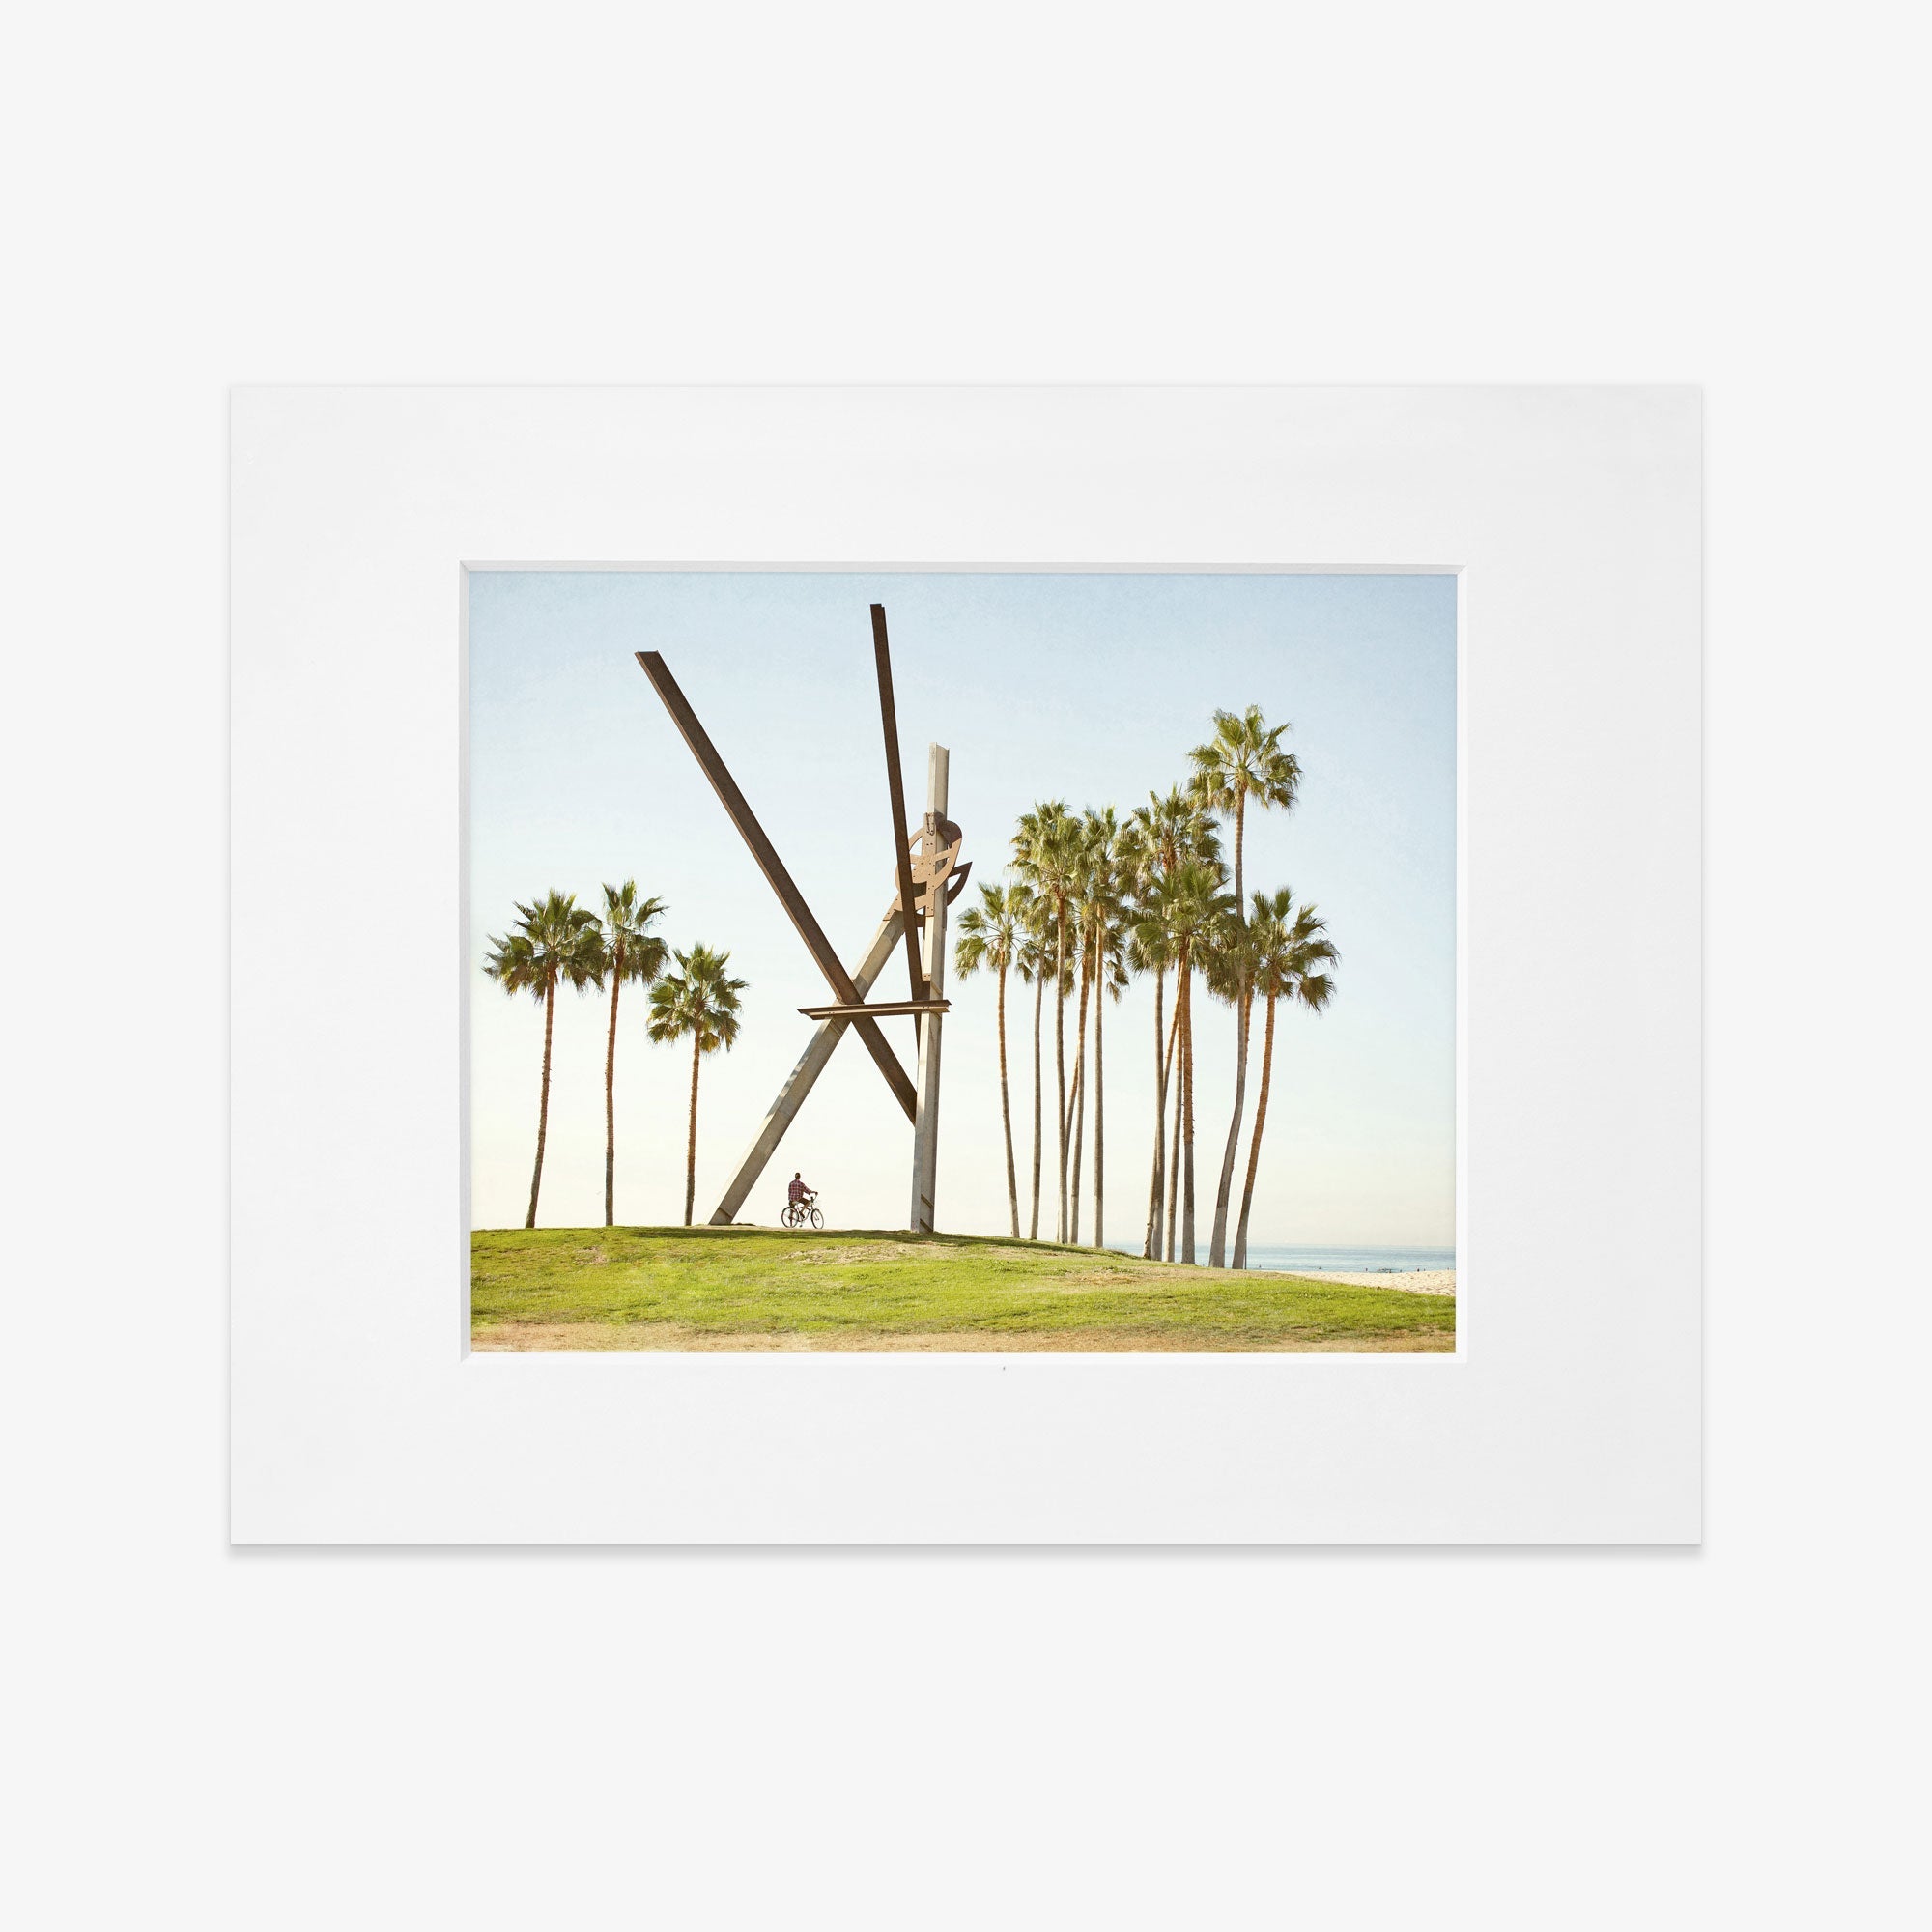 A framed photograph of the Venice Beach Landmark Sculpture, &#39;V is for Venice&#39; by Offley Green, surrounded by tall palm trees under a clear blue sky. A person on a bicycle is visible near the sculpture, captured on archival photographic paper.